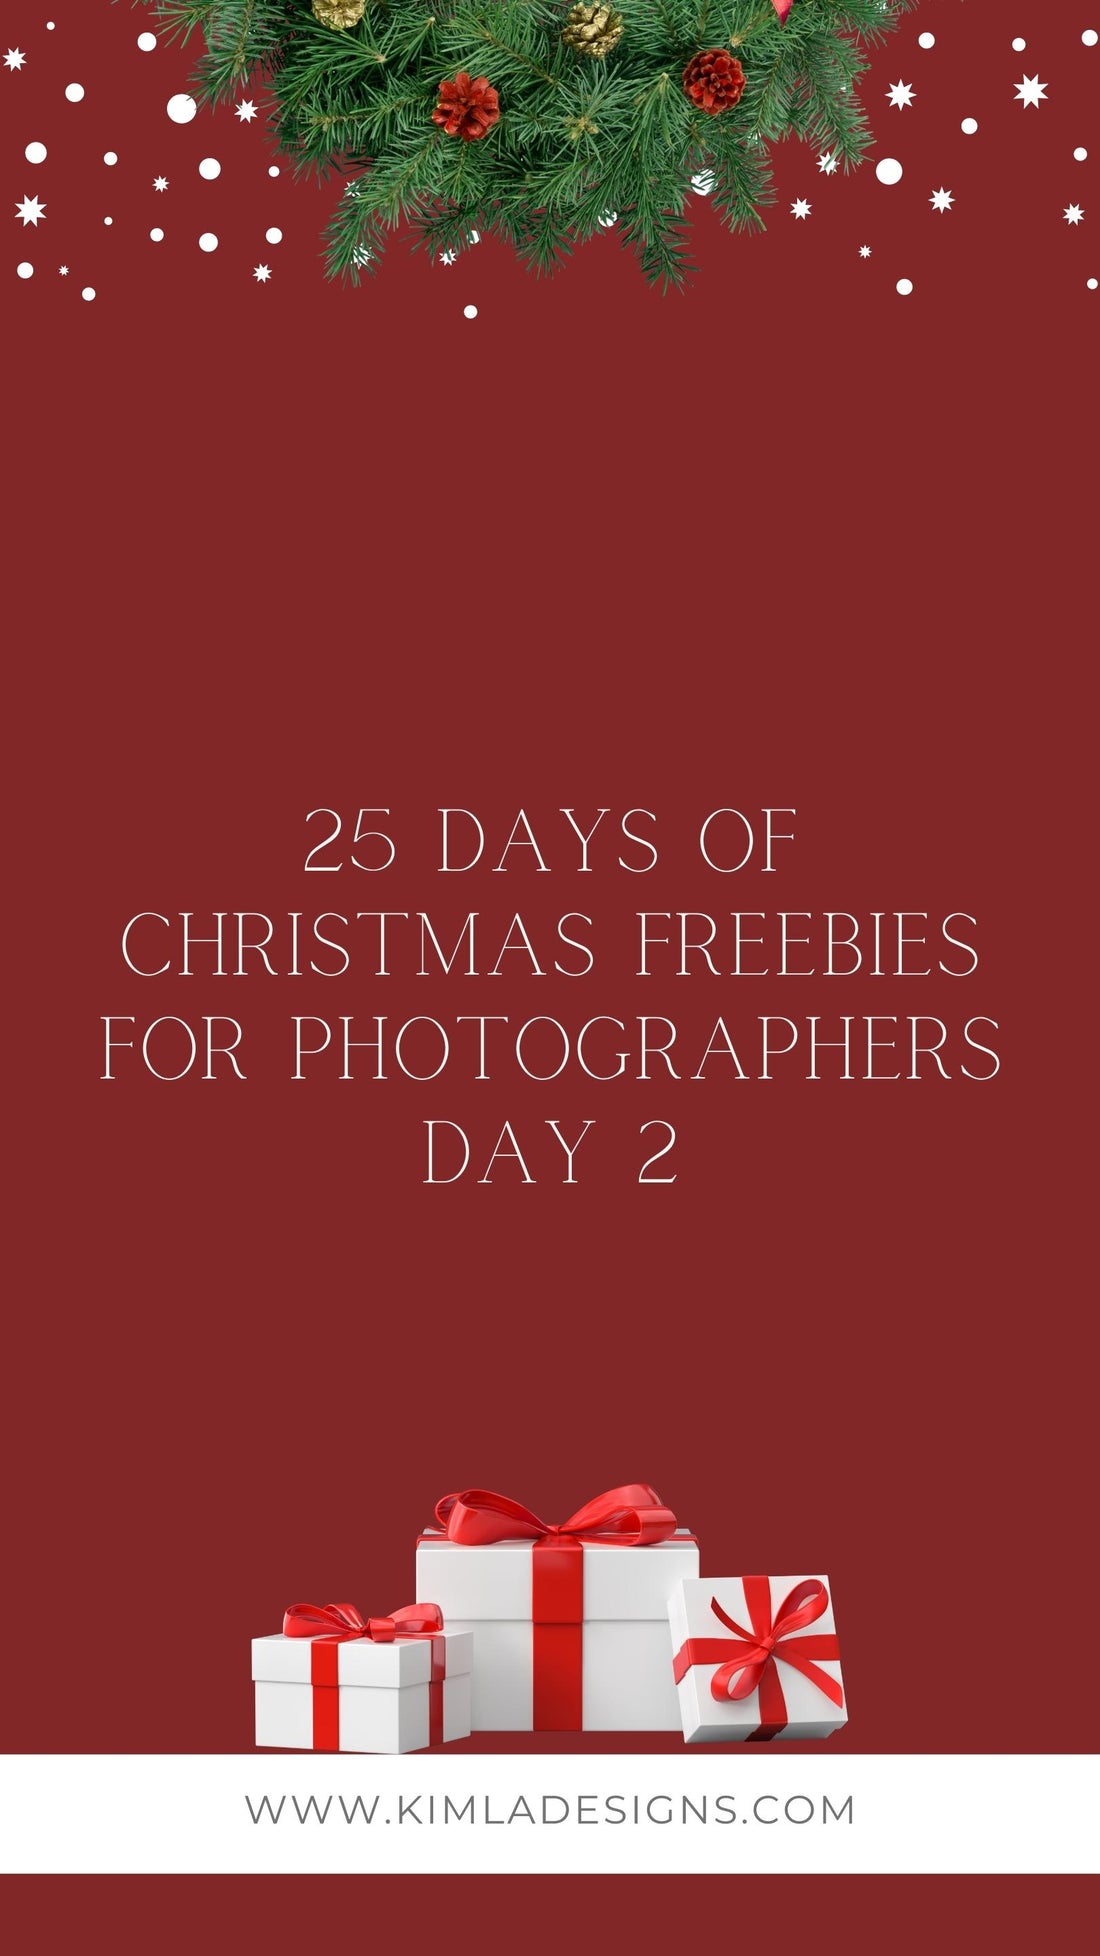 25 Days of Christmas Freebies Day 2nd